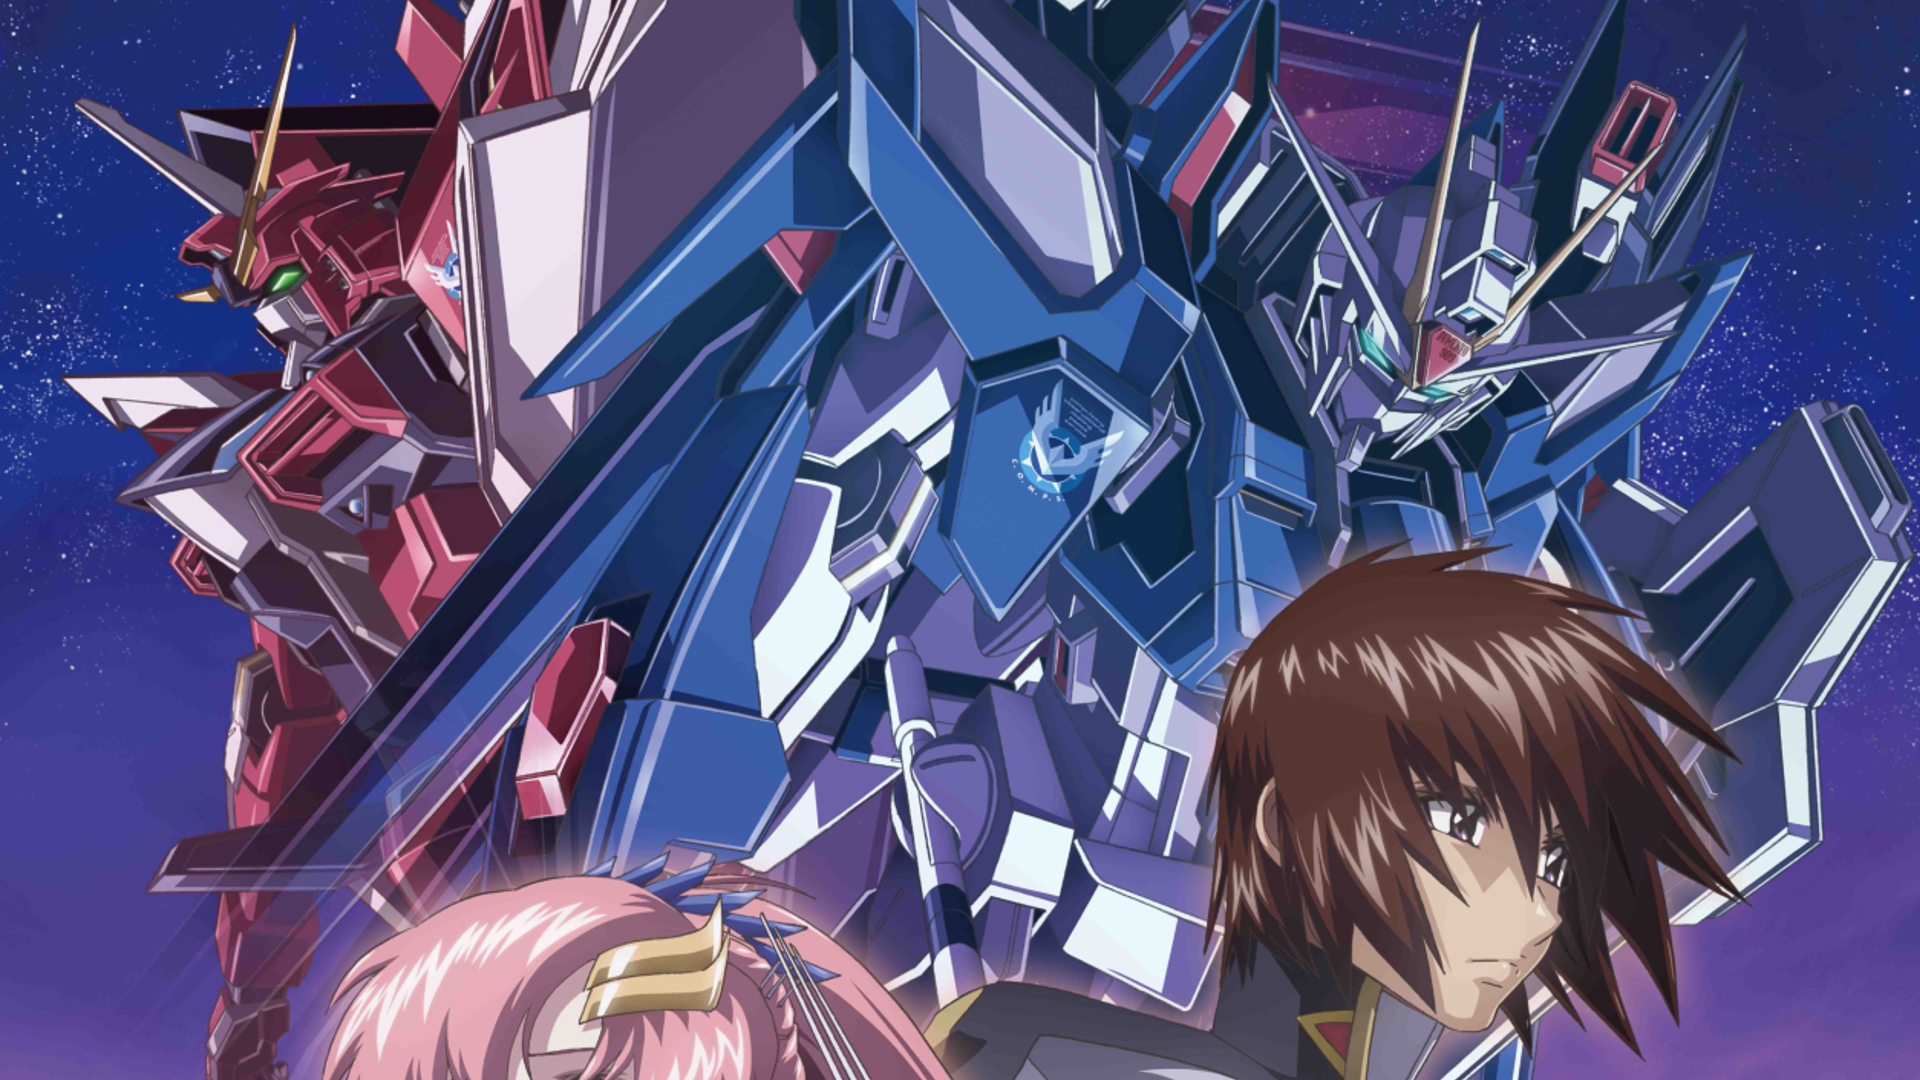 Mobile Suit Gundam Seed Freedom Is Coming To Malaysian Cinemas This April